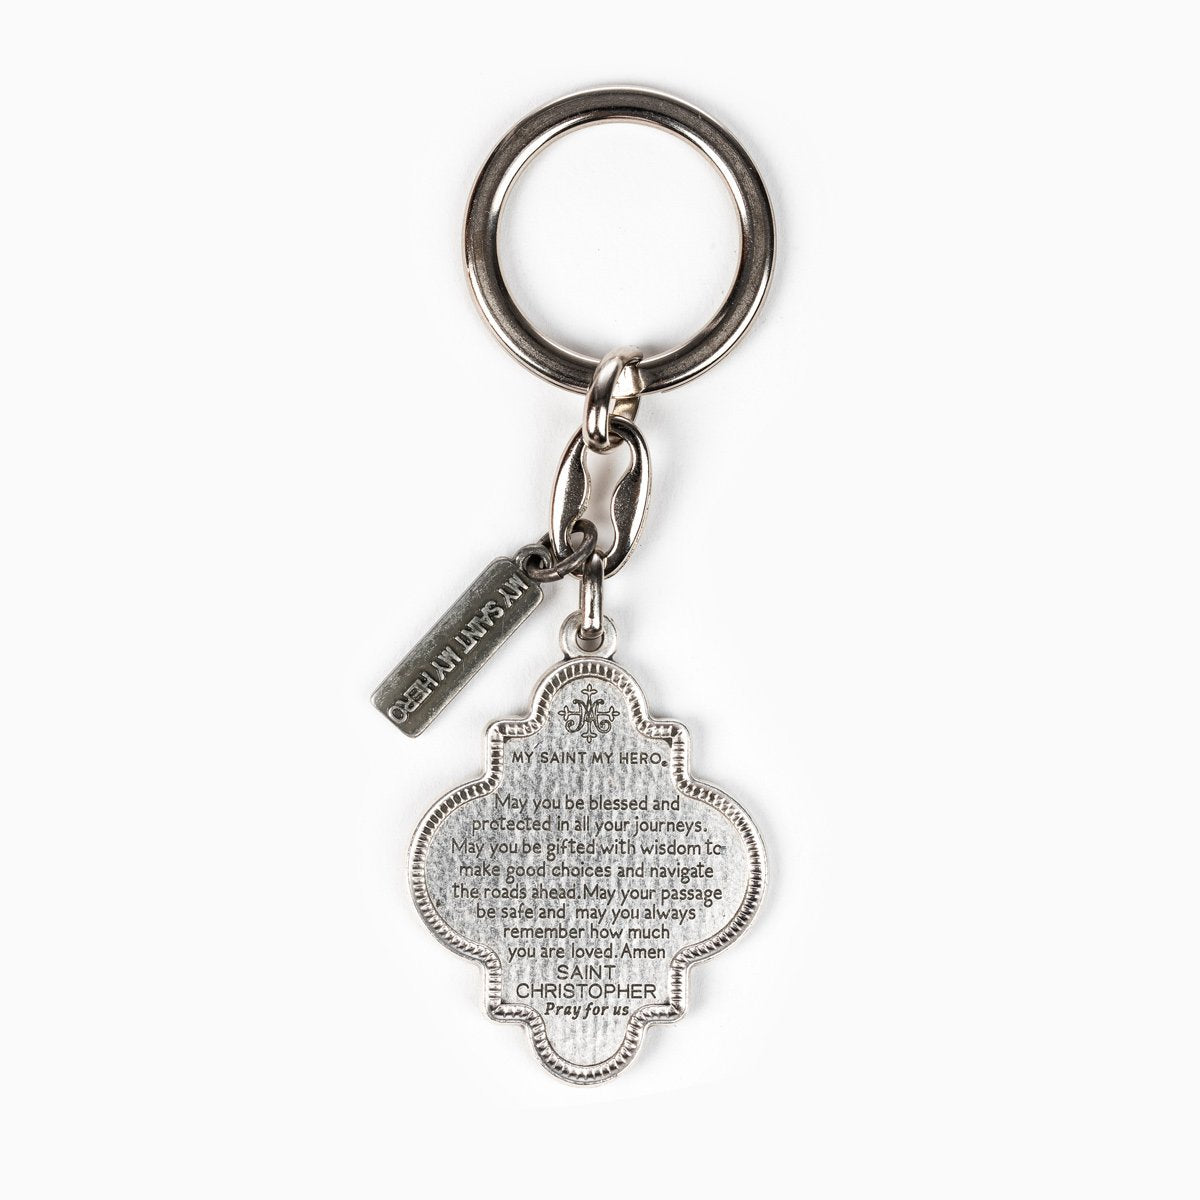 St. Christopher Travel Protection Key Ring